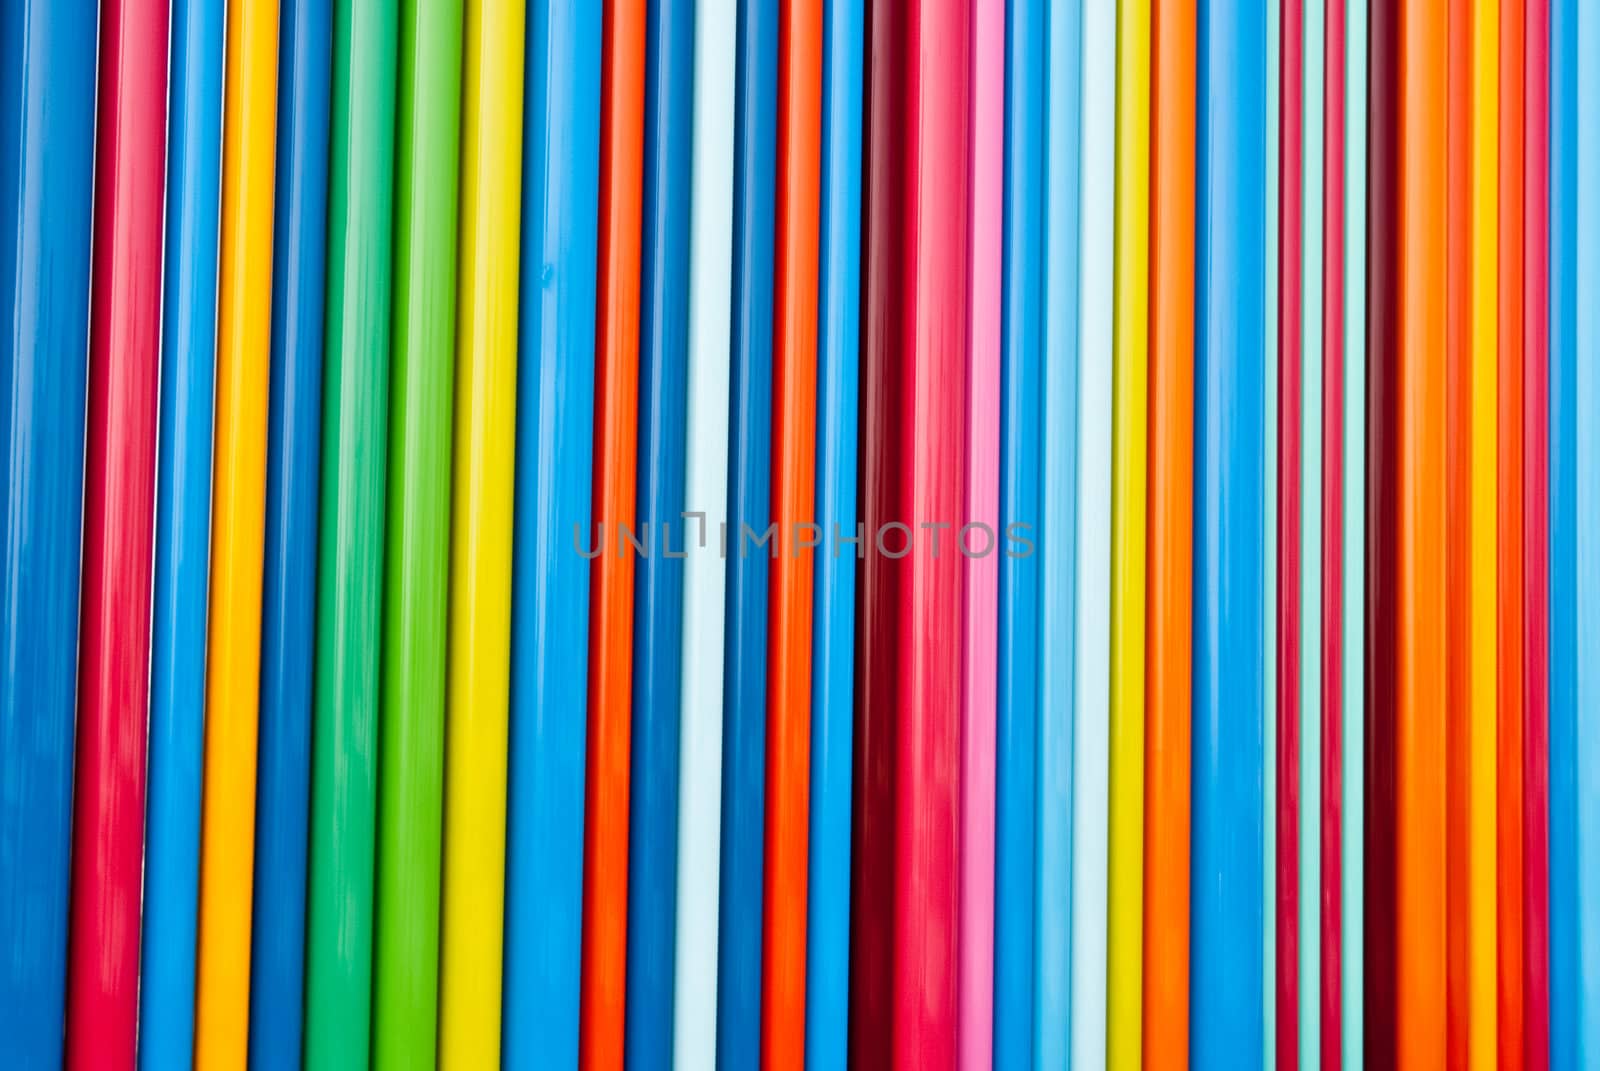 Vertical row of bright colors